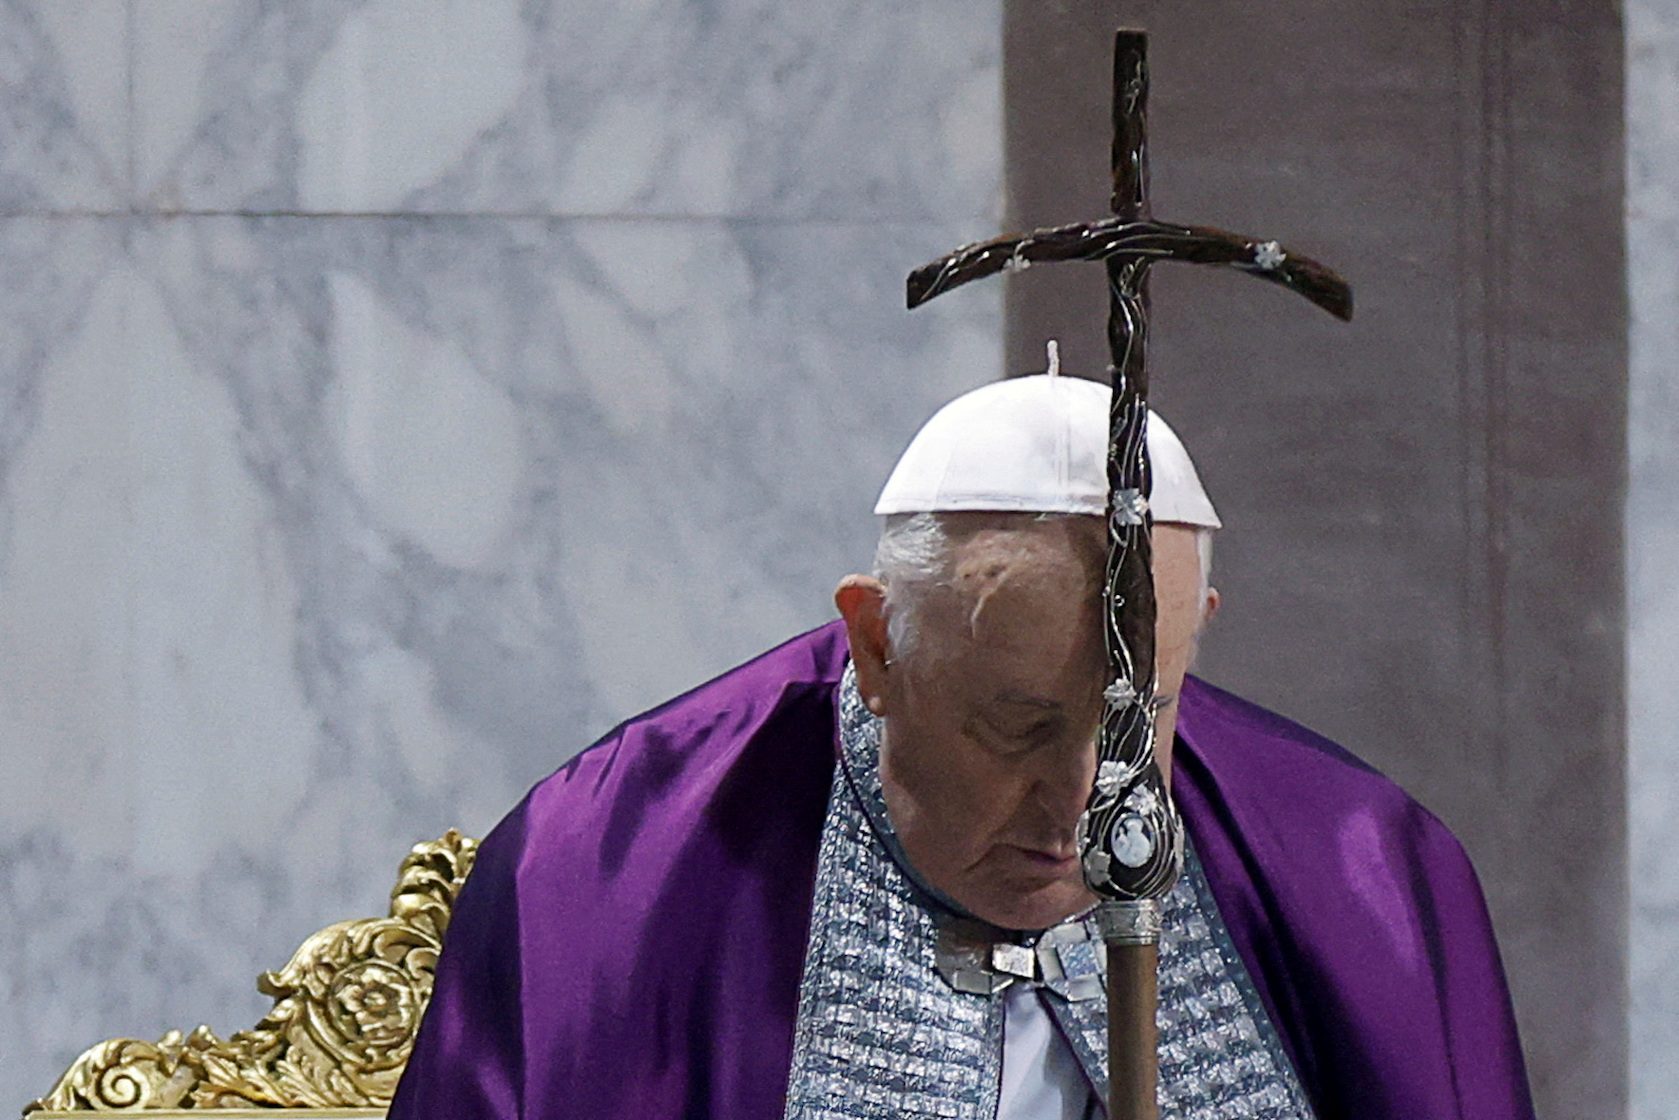 Pope Francis cancels appointments twice in 3 days as mild flu persists